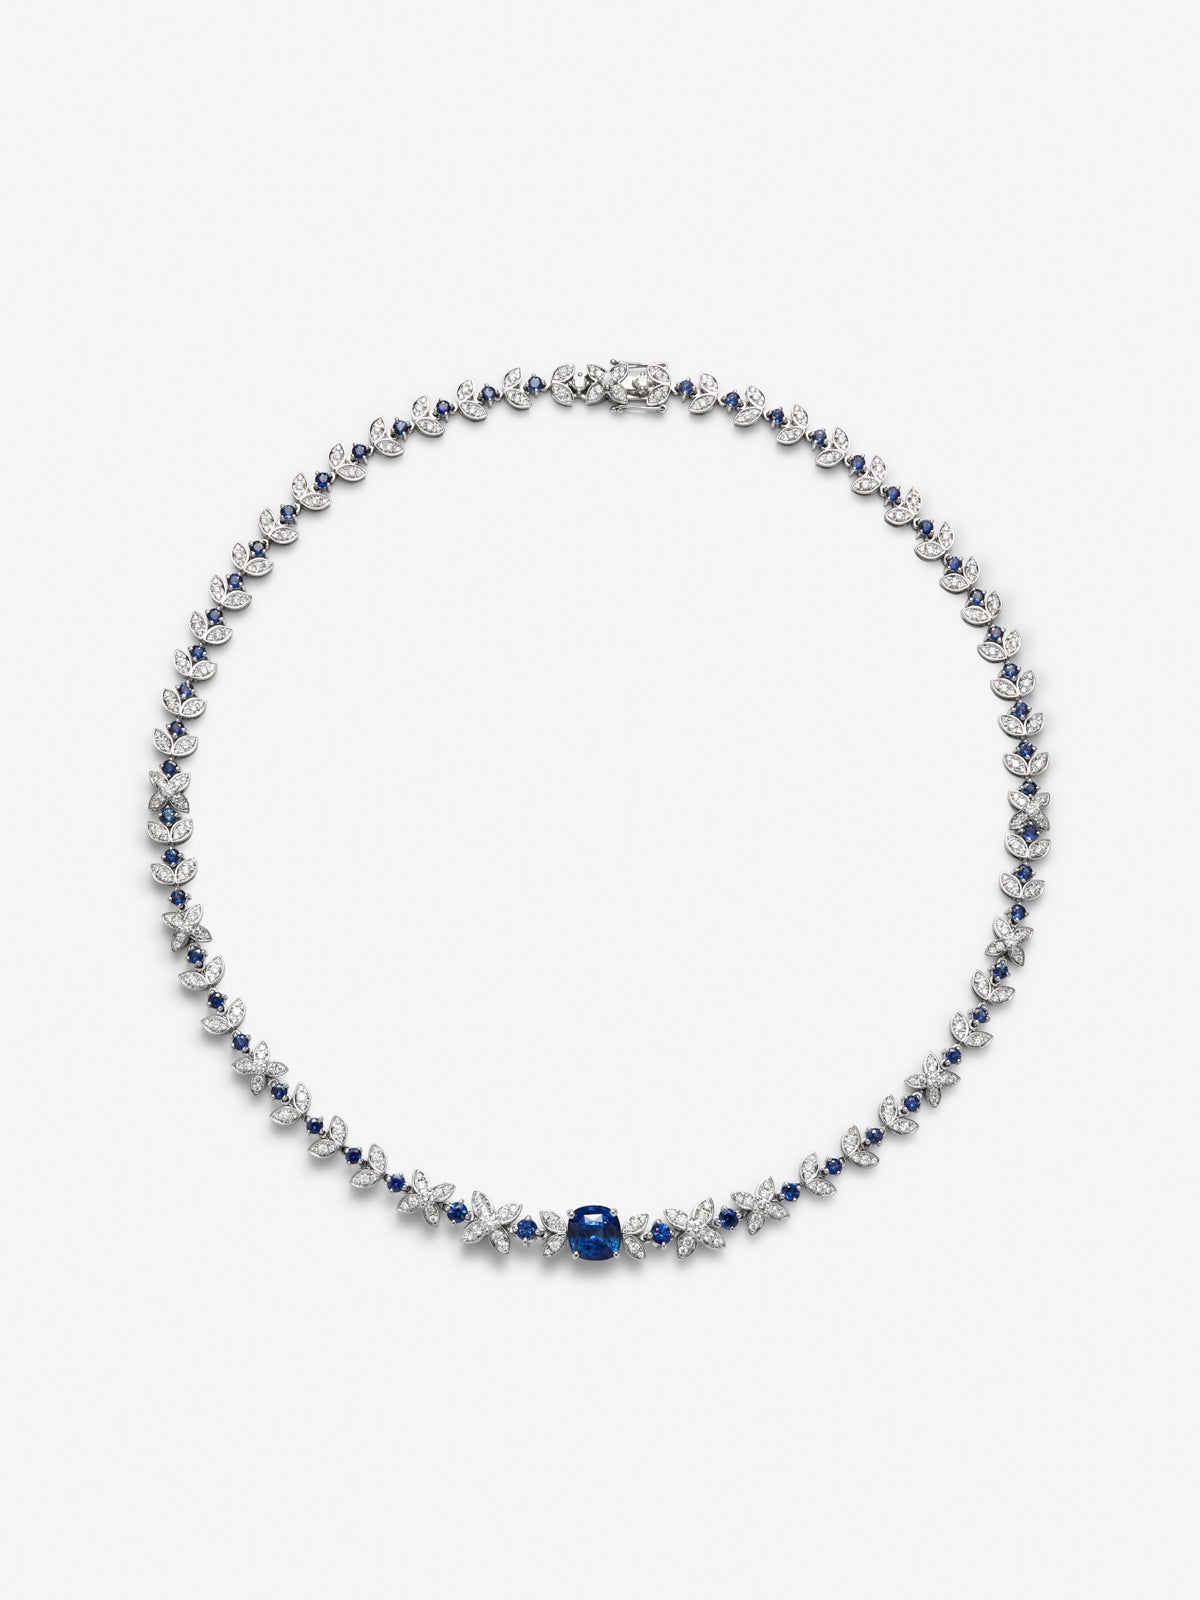 18K white gold necklace with a cushion-cut cornflower blue sapphire of 3.51 cts, 58 brilliant-cut blue sapphires with a total of 4.32 cts and 393 brilliant-cut diamonds with a total of 3.58 cts